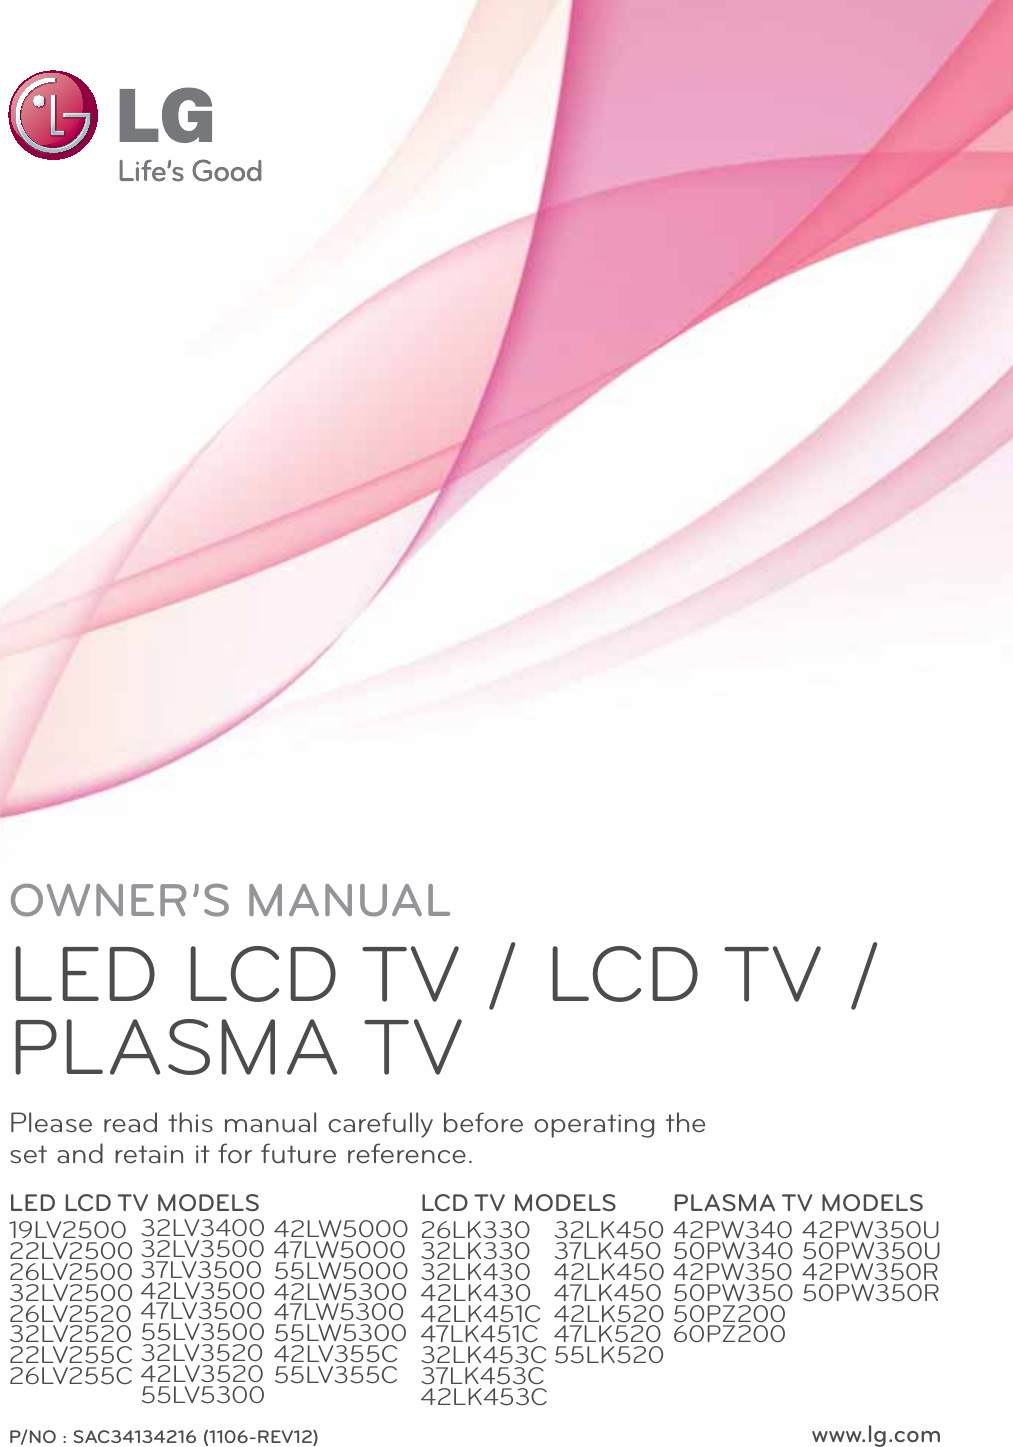 www.lg.comP/NO : SAC34134216 (1106-REV12)OWNER’S MANUALLED LCD TV / LCD TV / PLASMA TVPlease read this manual carefully before operating the set and retain it for future reference.LED LCD TV MODELS19LV250022LV250026LV250032LV250026LV252032LV252022LV255C26LV255CLCD TV MODELS26LK33032LK33032LK43042LK43042LK451C47LK451C32LK453C37LK453C42LK453CPLASMA TV MODELS42PW34050PW34042PW35050PW35050PZ20060PZ20032LV340032LV350037LV350042LV350047LV350055LV350032LV352042LV352055LV530032LK45037LK45042LK45047LK45042LK52047LK52055LK52042PW350U50PW350U42PW350R50PW350R42LW500047LW500055LW500042LW530047LW530055LW530042LV355C55LV355C